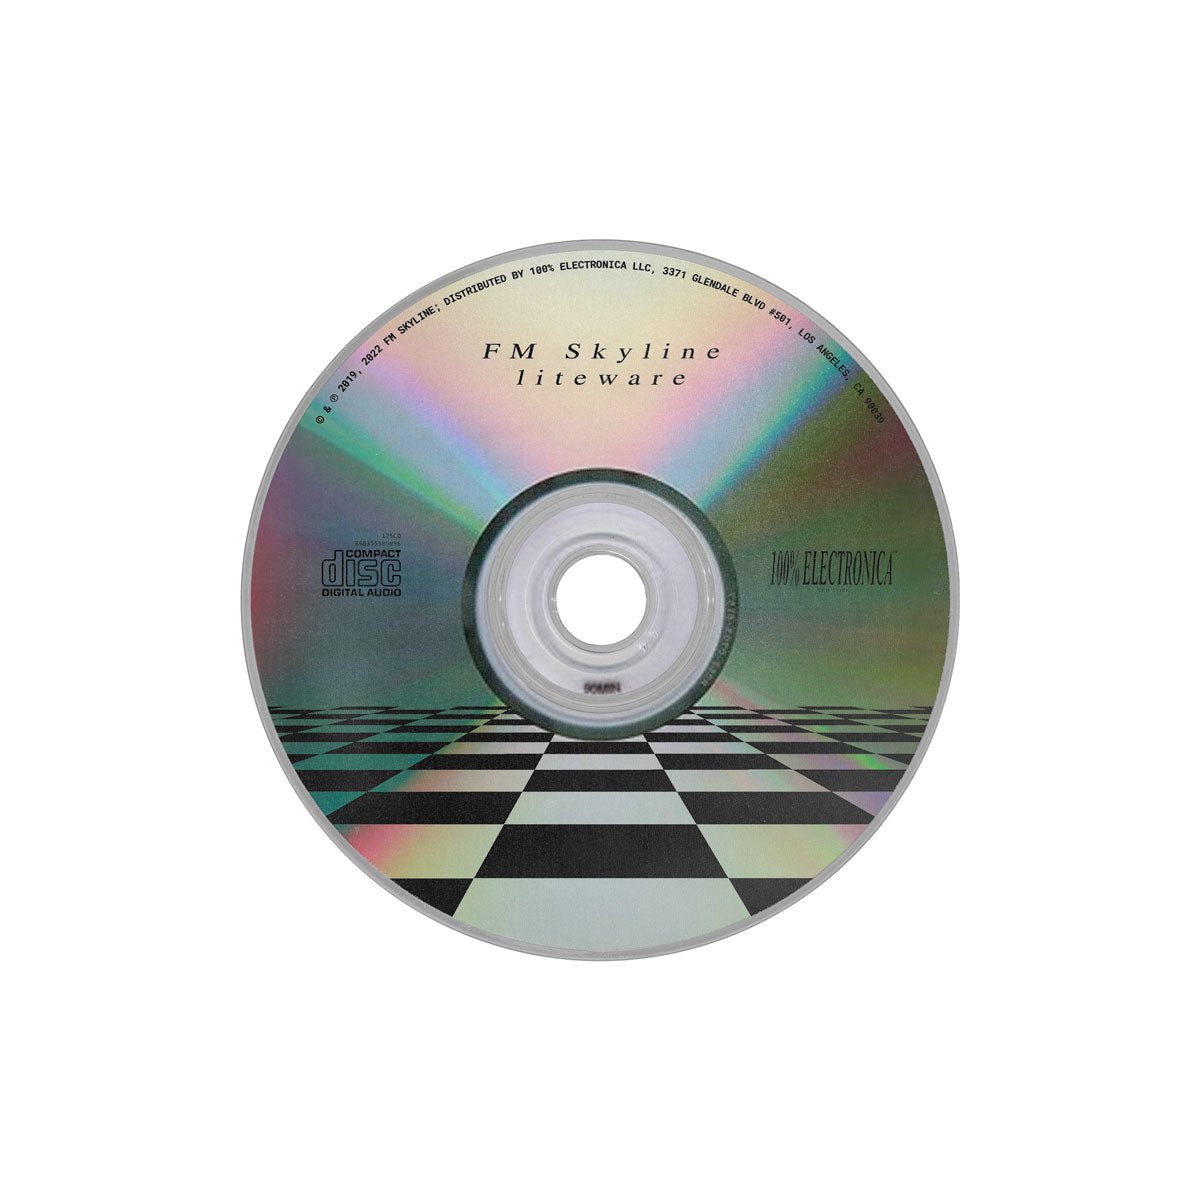 FM Skyline - Liteware CD - 100% Electronica Official Store (Photo 2)